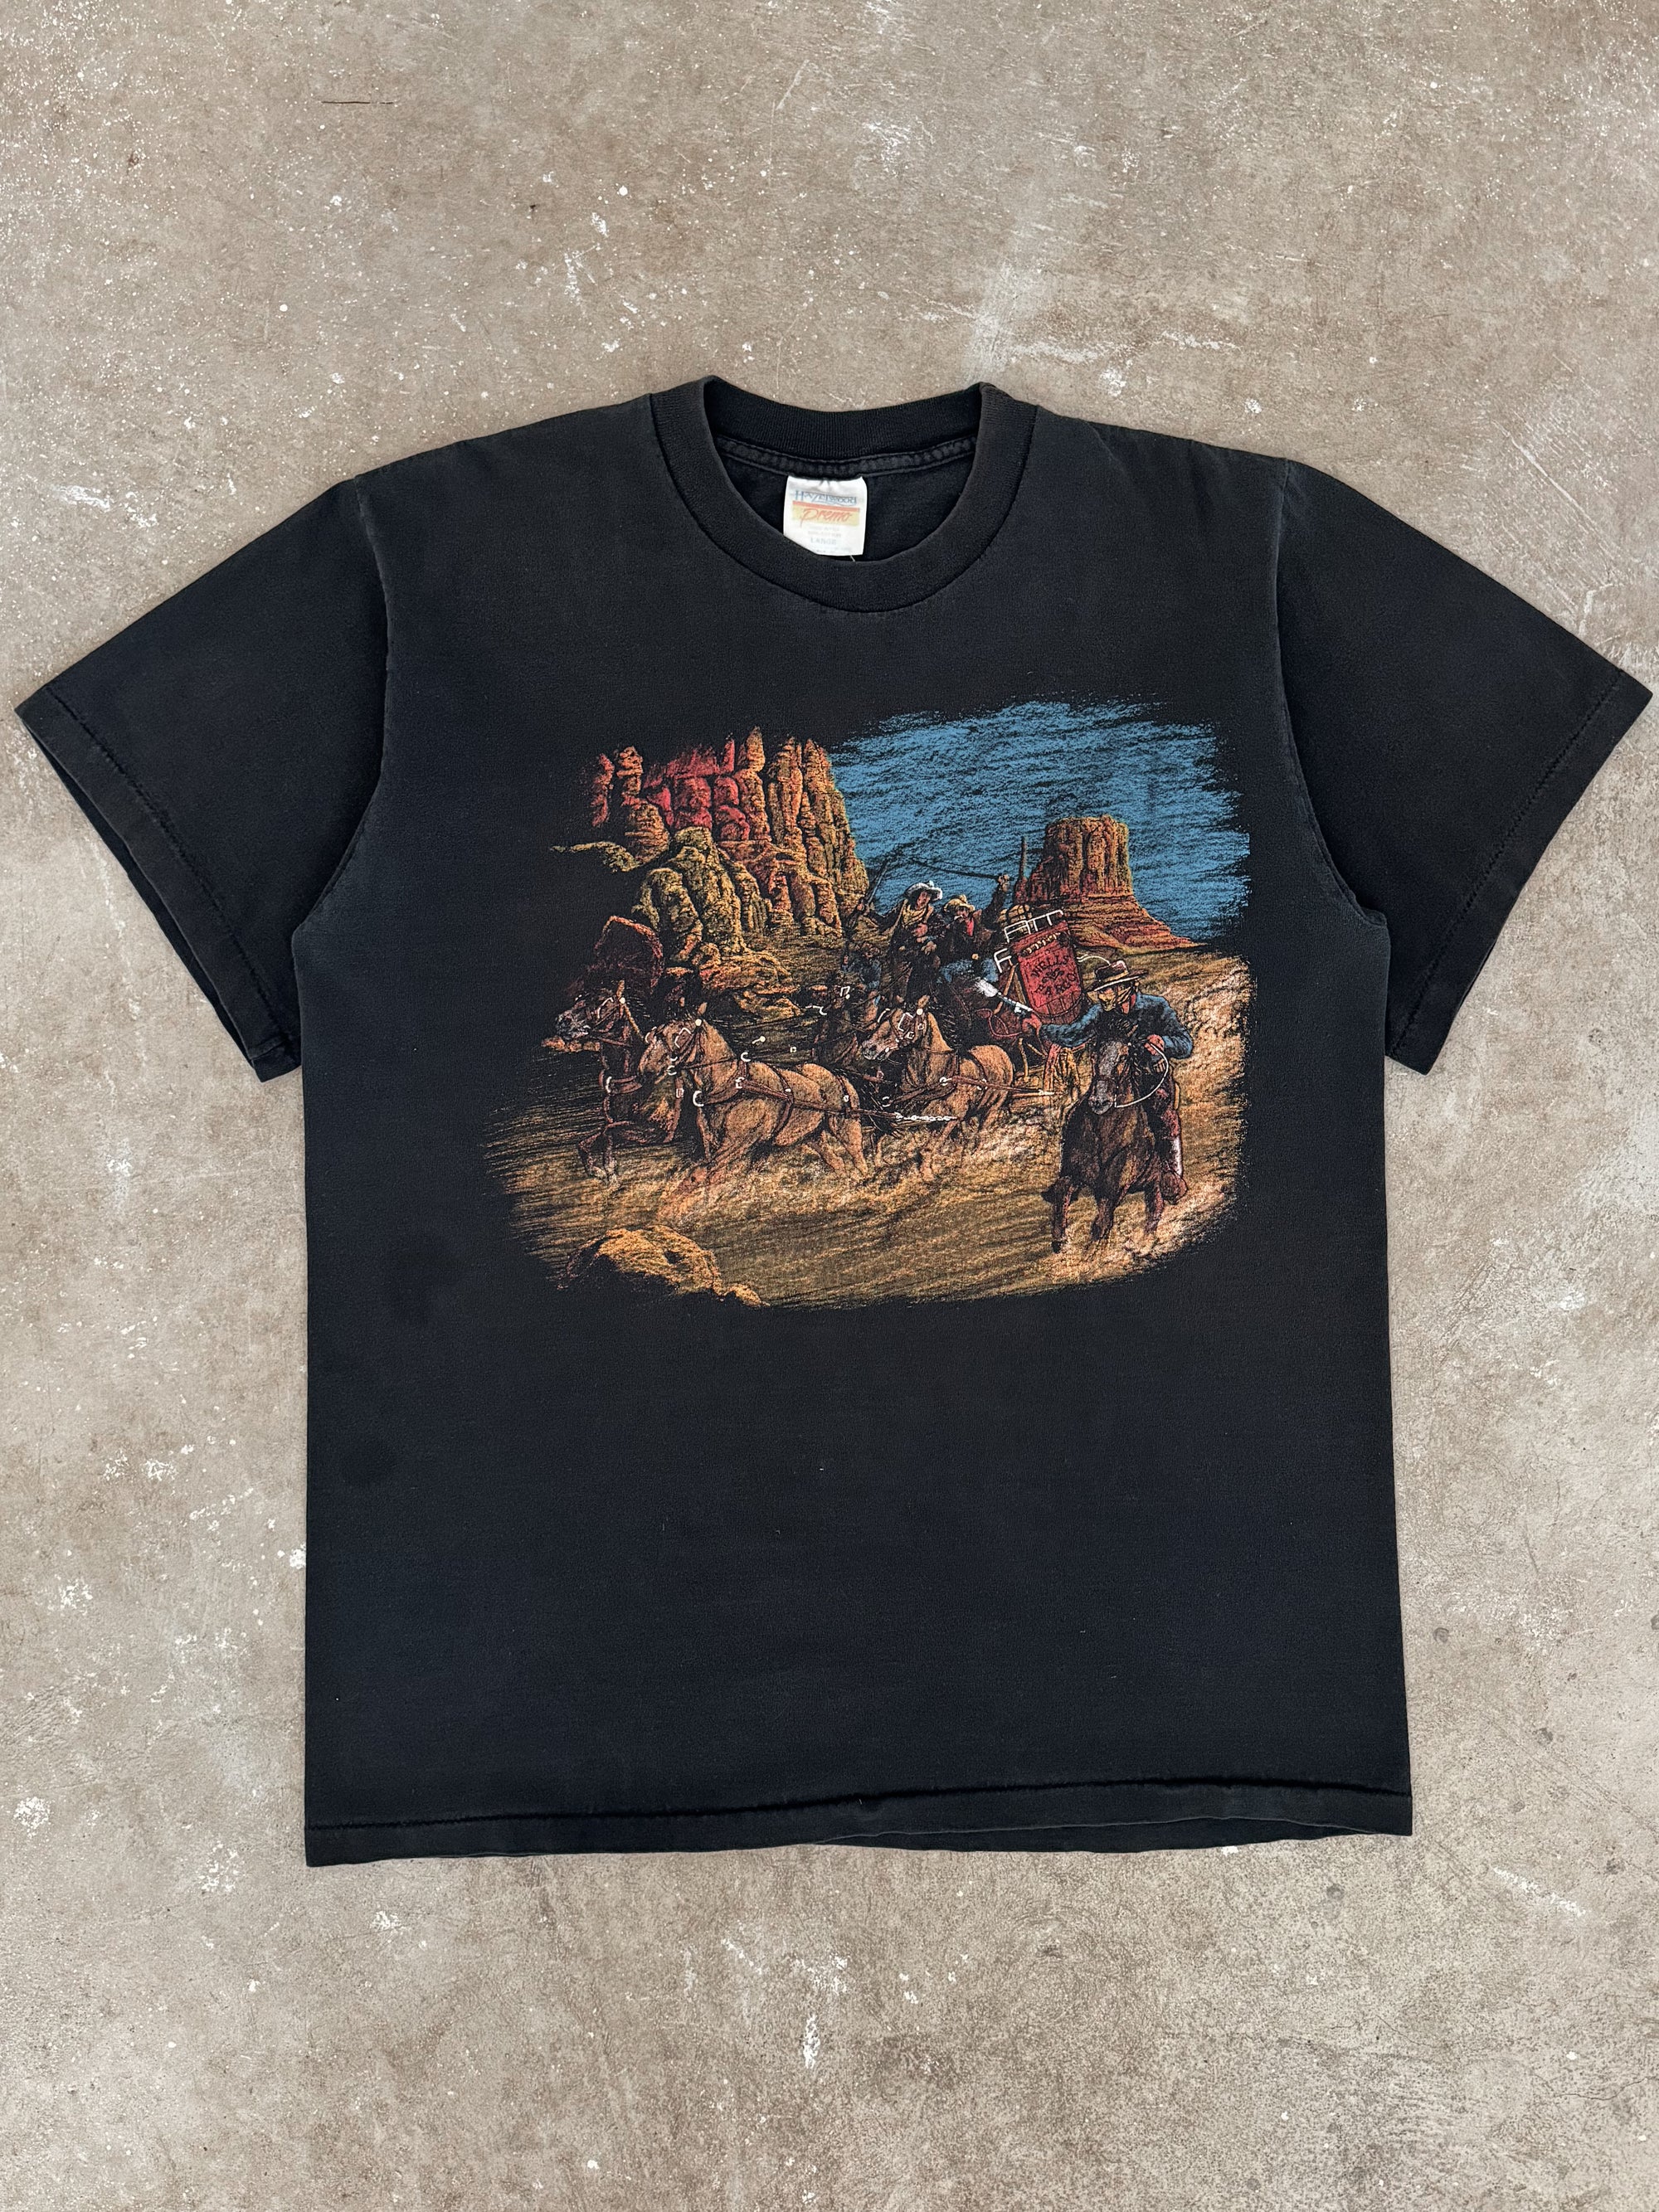 1990s "Stagecoach Robbery Cowboy Art" Tee (L)